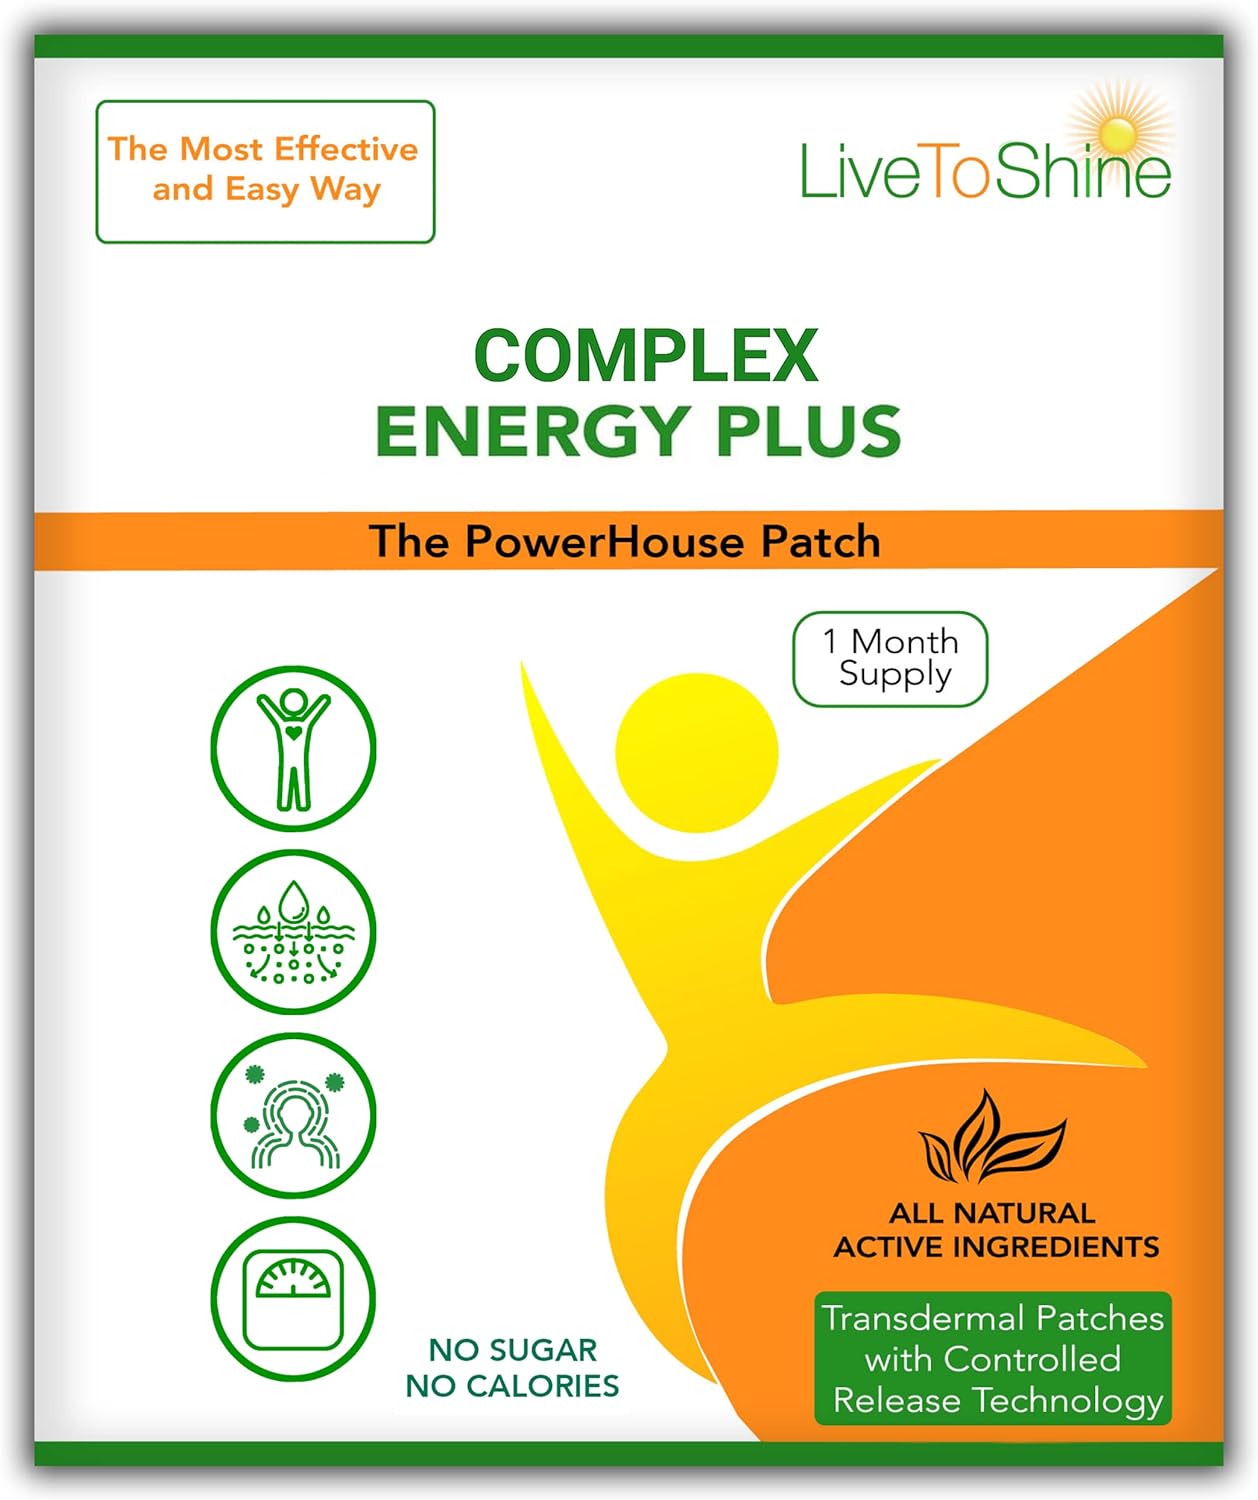 Live To Shine Energy Be Patch - Natural Ingredients for Energy, Alertness and Wellbeing - 30 Patches - USA Made